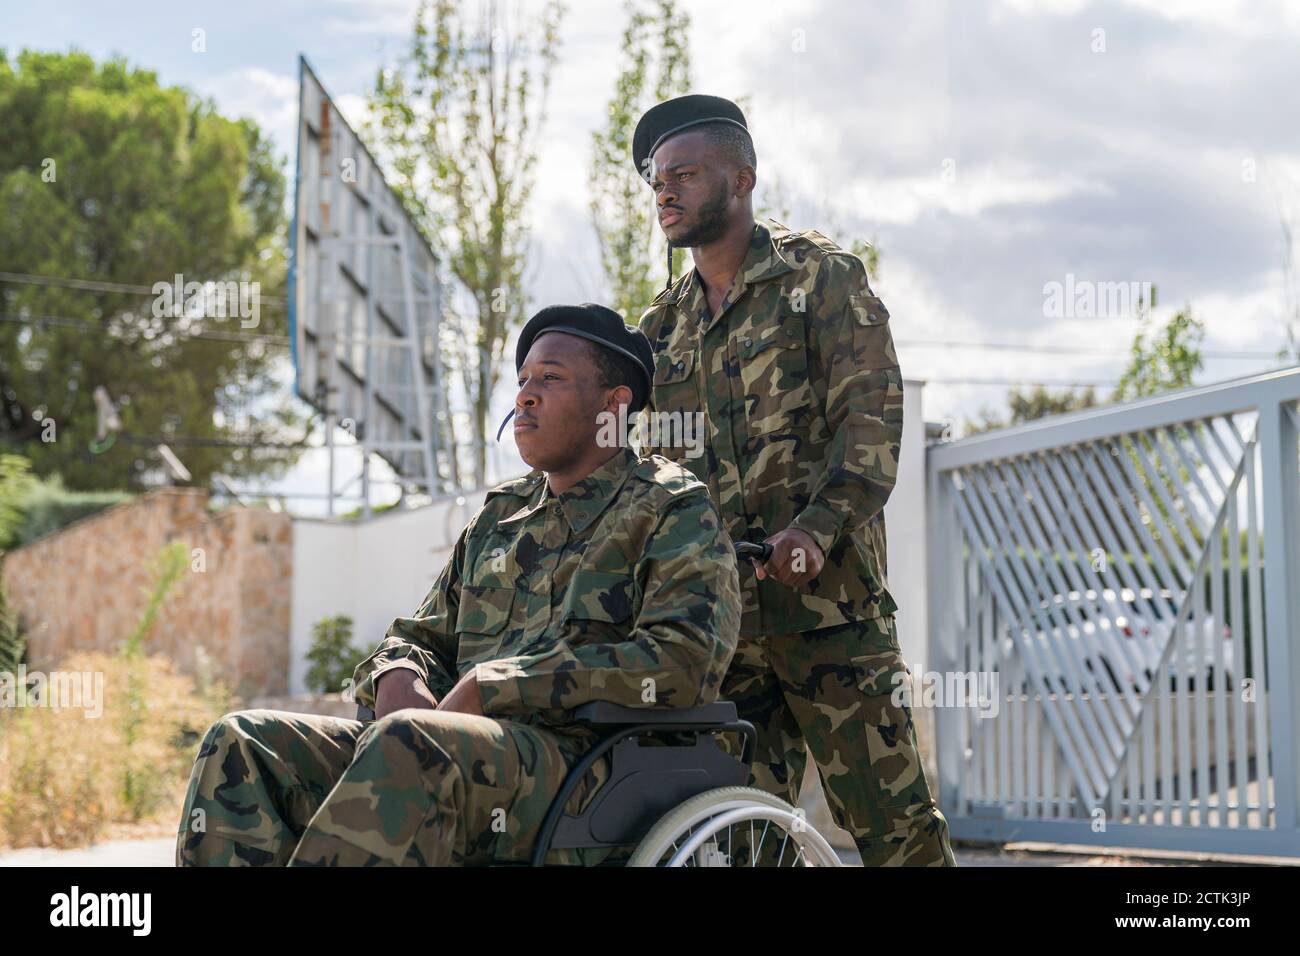 Serious army soldier helping another military officer sitting on wheelchair Stock Photo